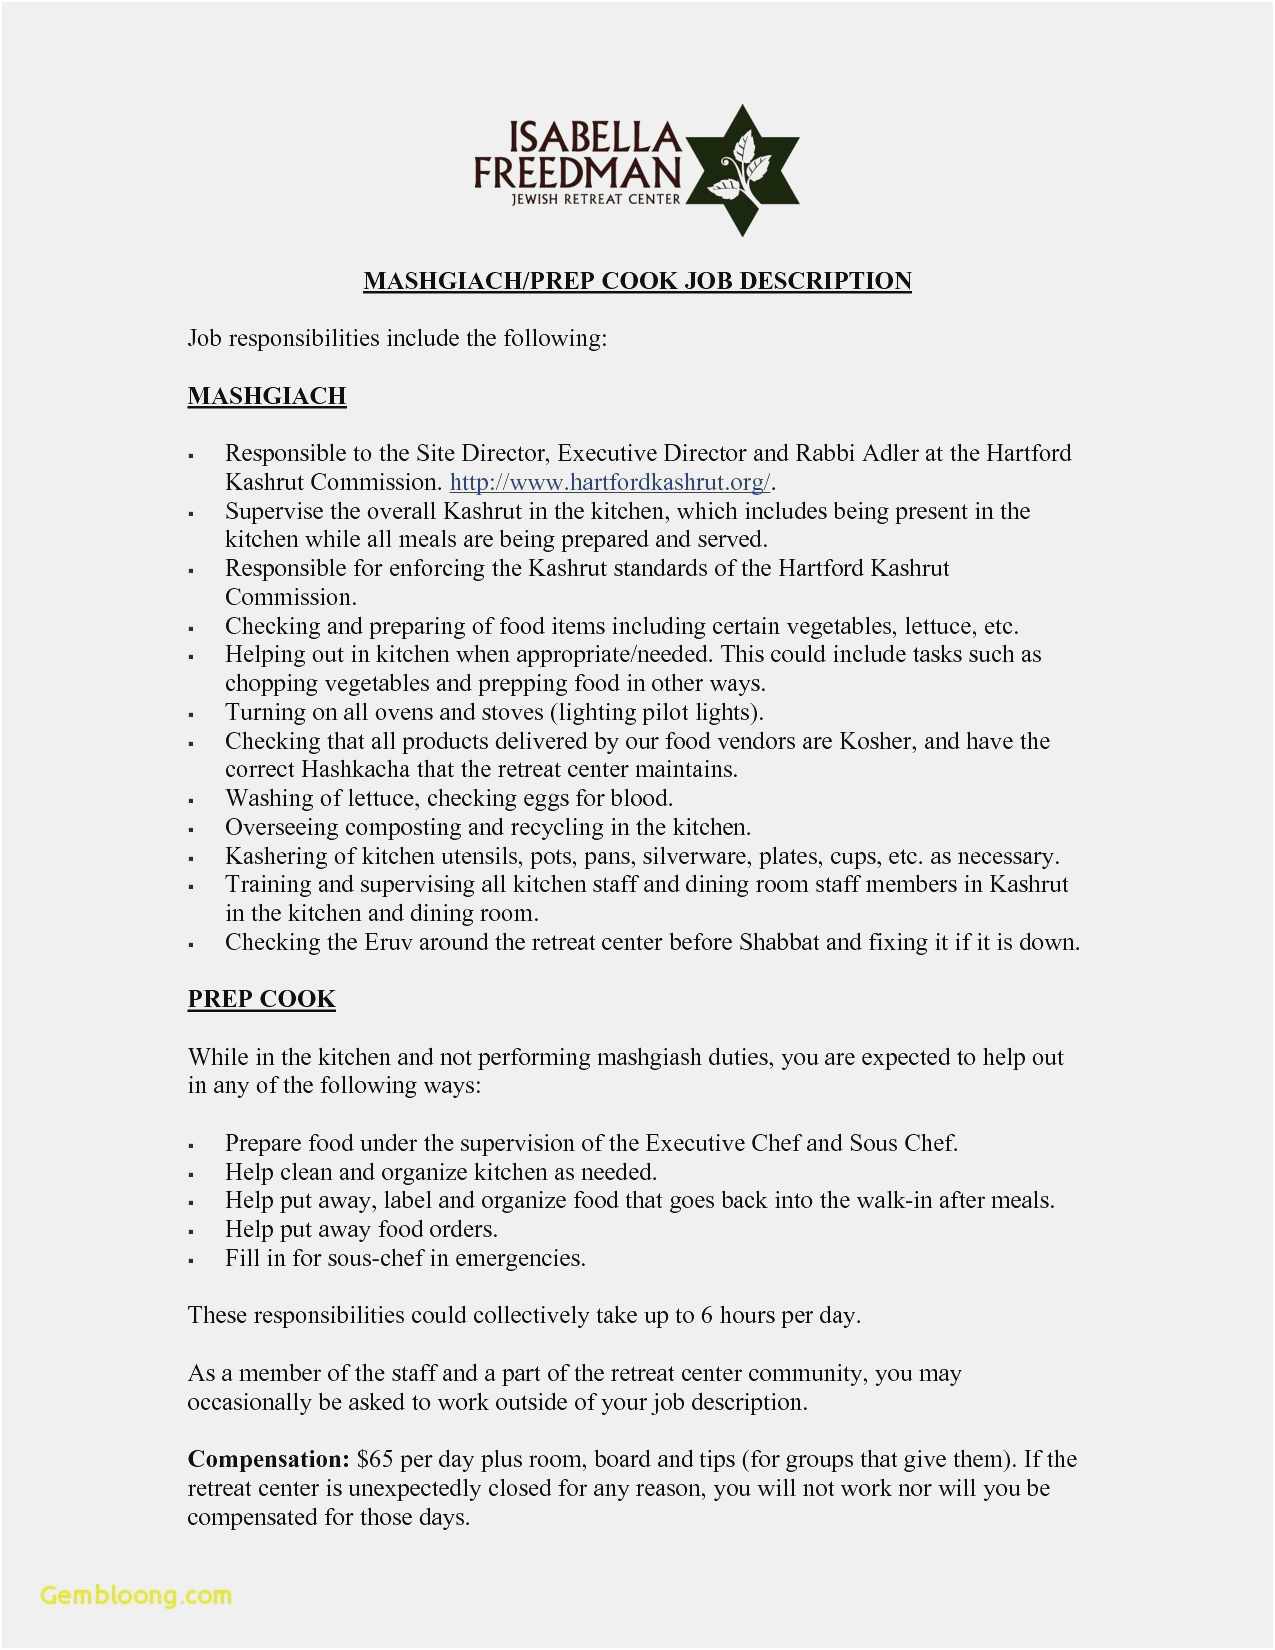 Free Downloadable Resume Templates Download Resume Layout For Microsoft Word 2010 Fresh Fresh Grapher Resume Examples free downloadable resume templates|wikiresume.com